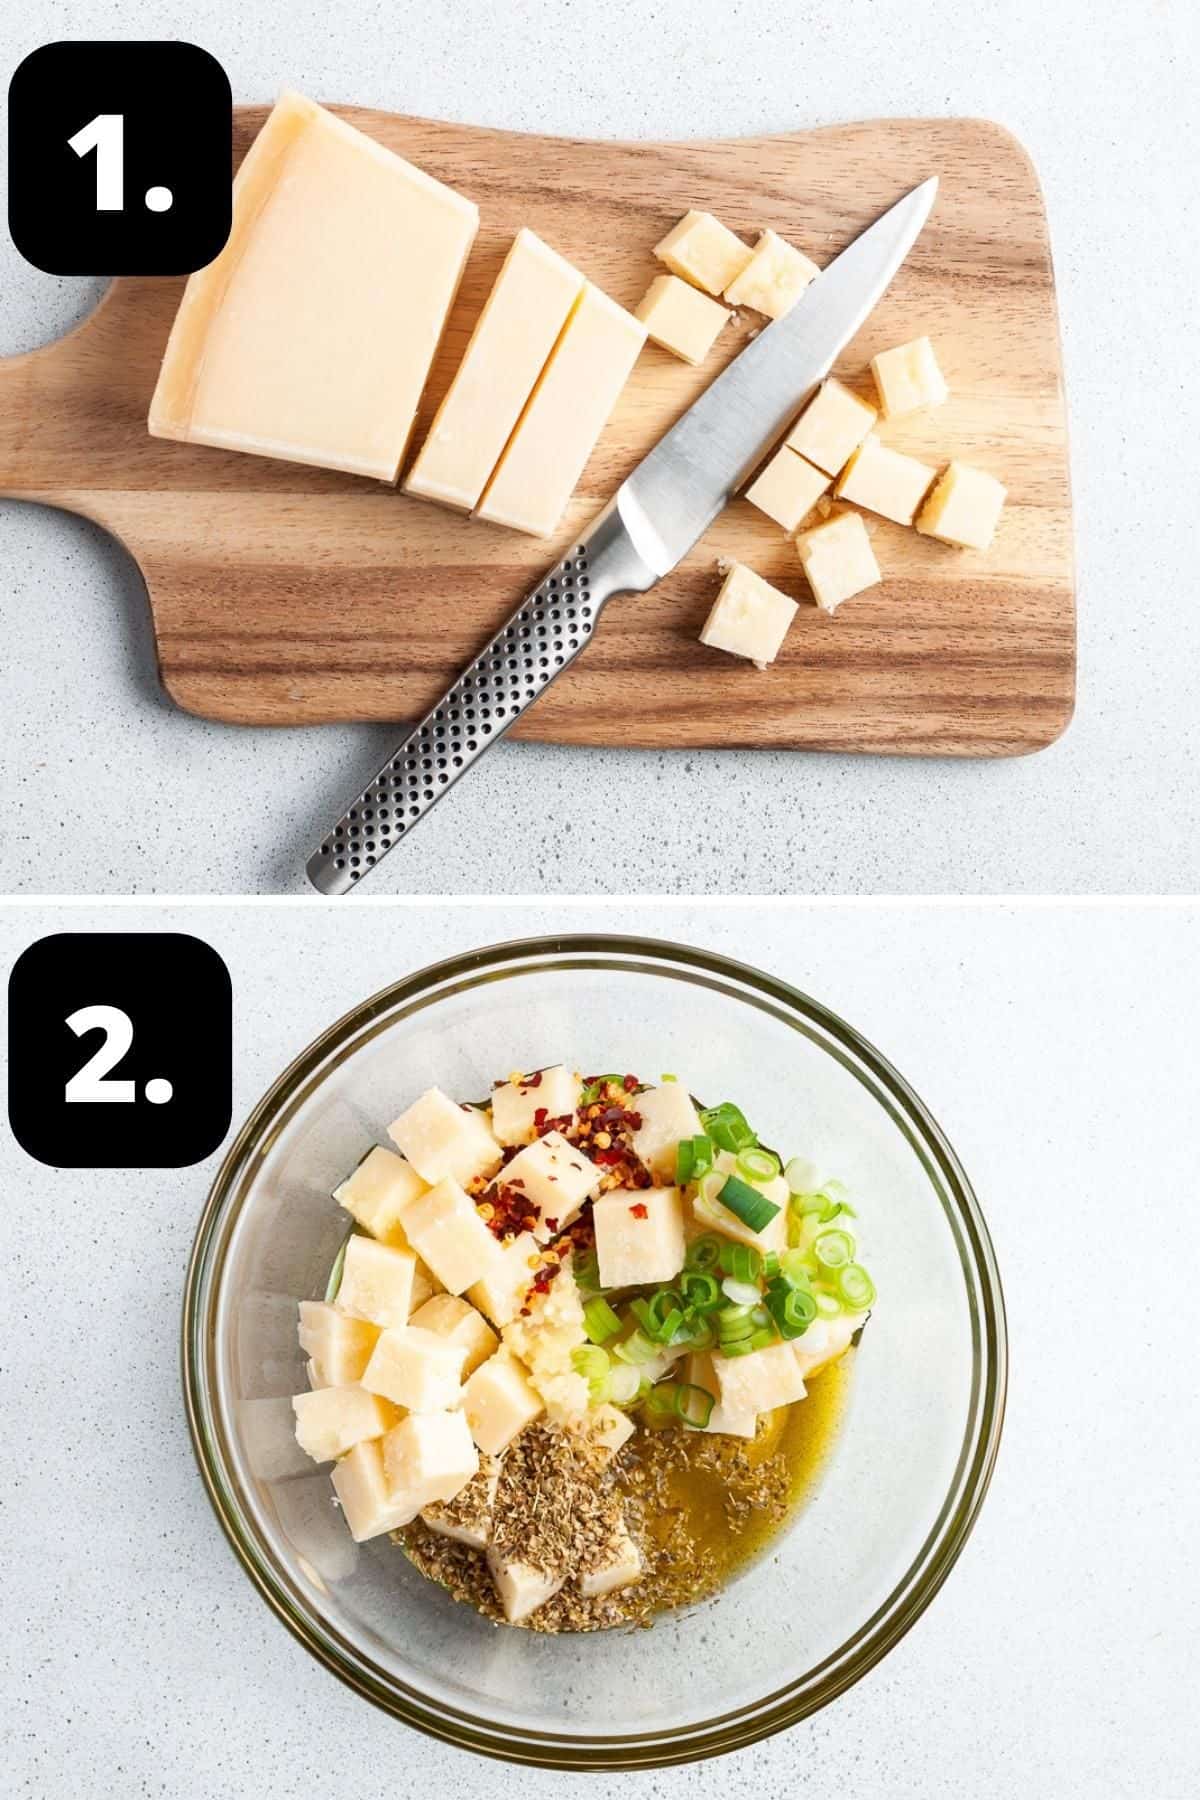 Steps 1-2 of preparing this recipe - cutting the Parmesan cheese and all of the ingredients in a bowl ready to mix.